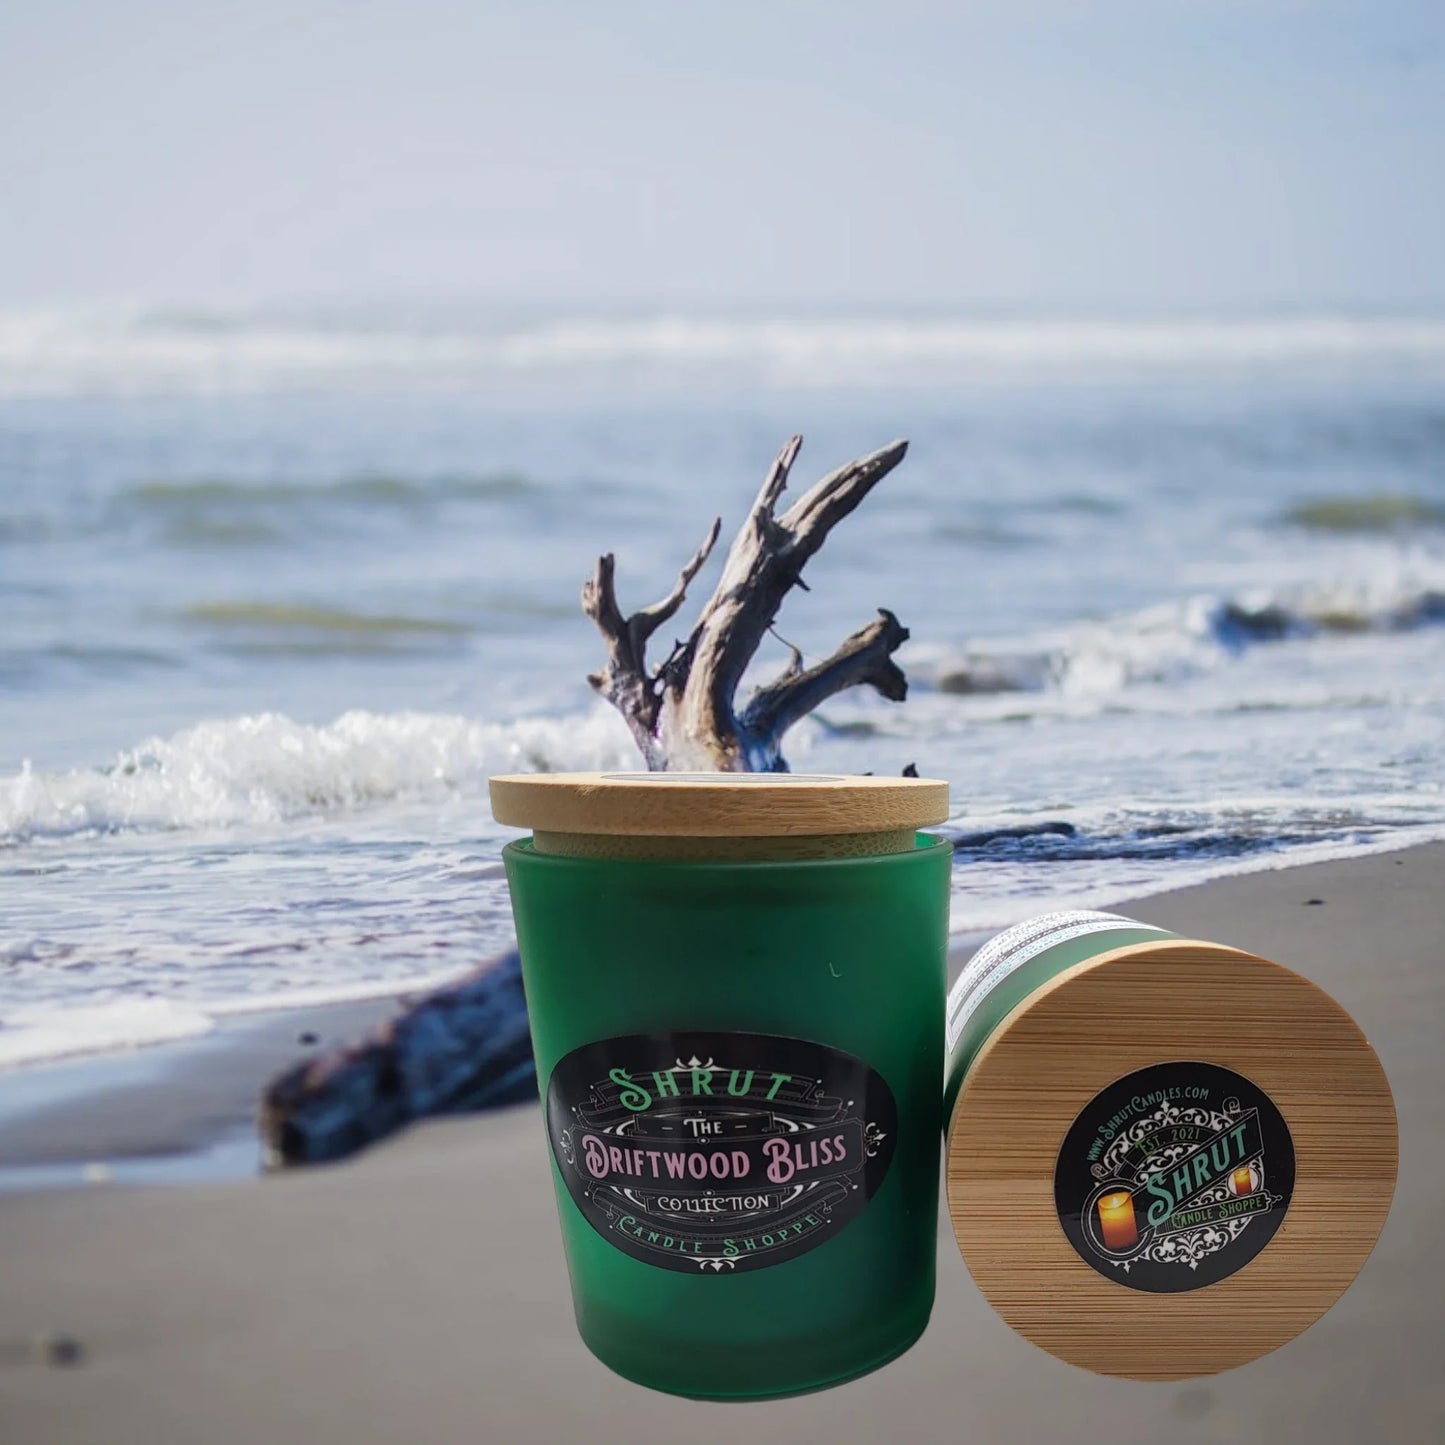 Driftwood Bliss |  Hand-Poured, Scented Candle, Summer Fragrance